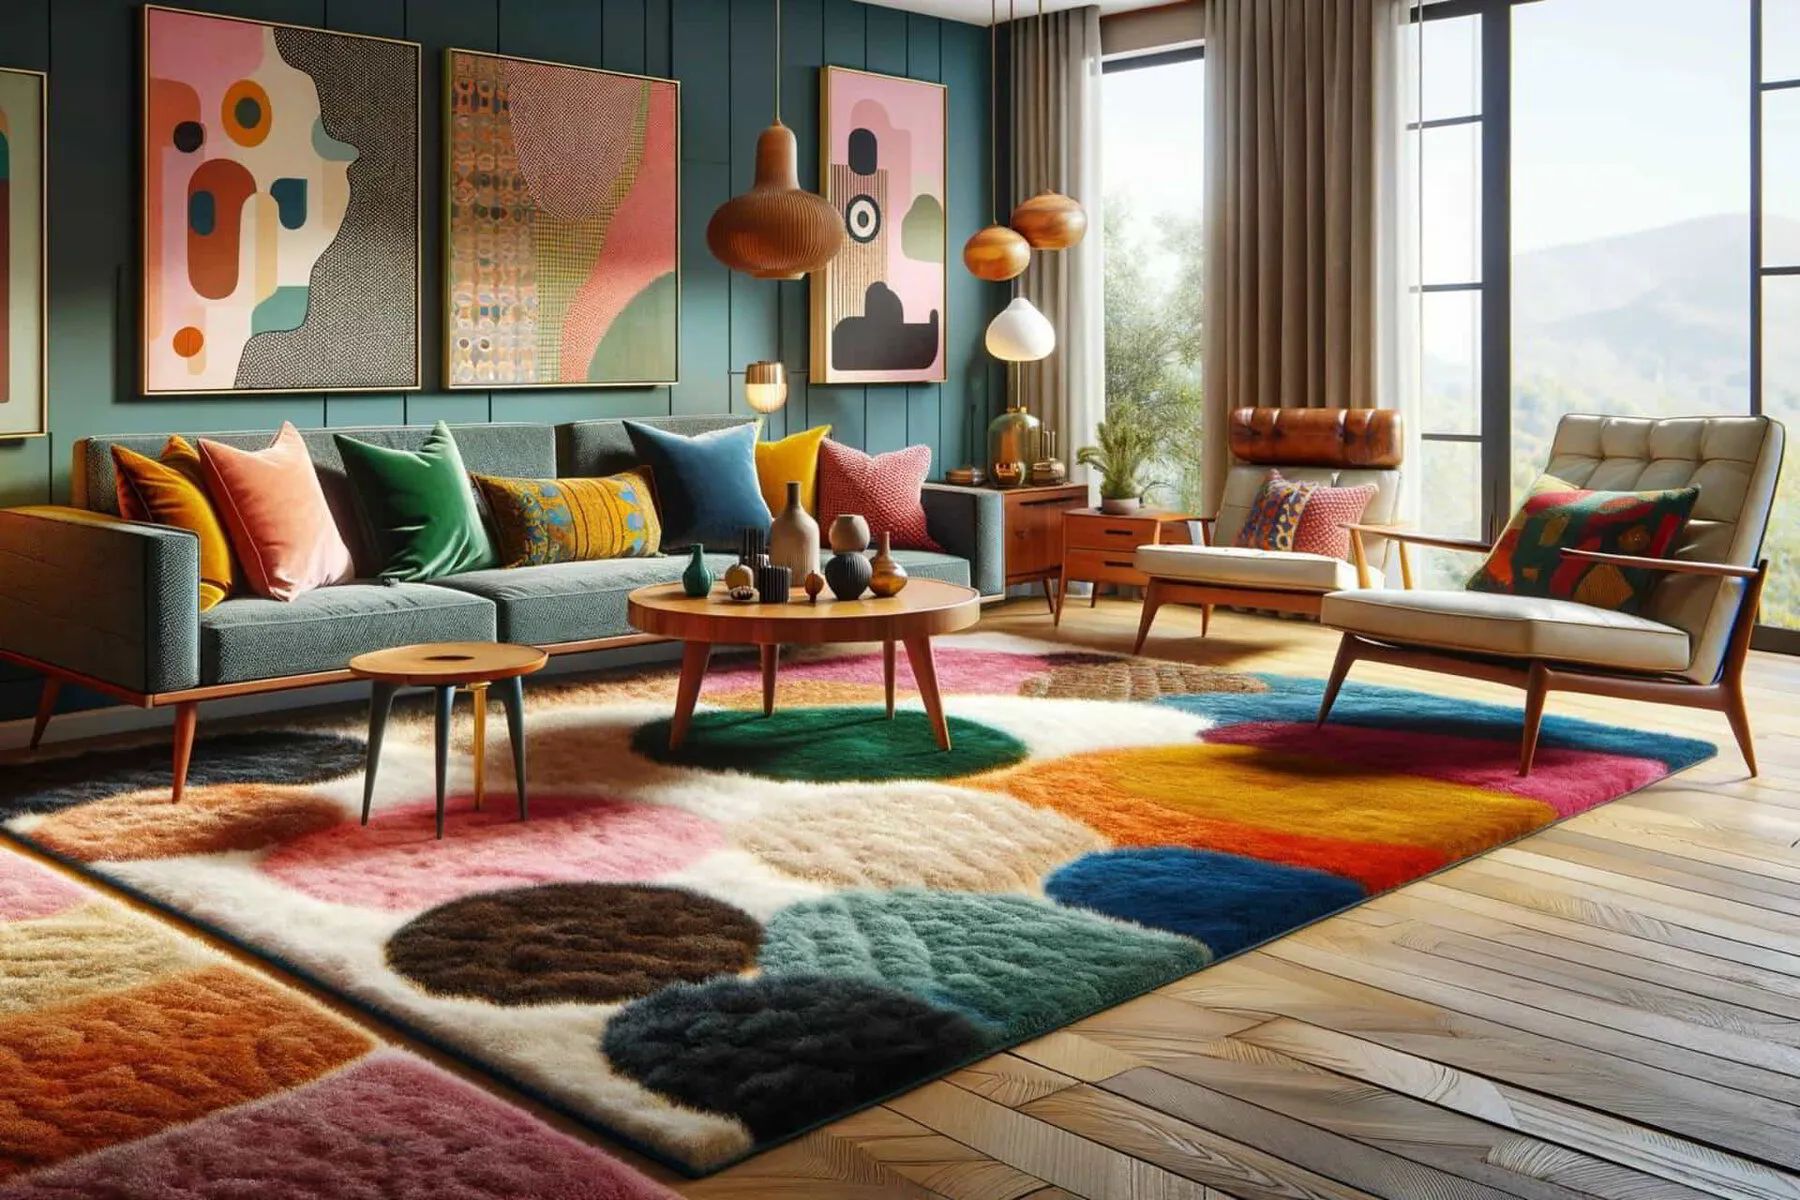 mid-century modern living room with vibrant colors and a variety of textures